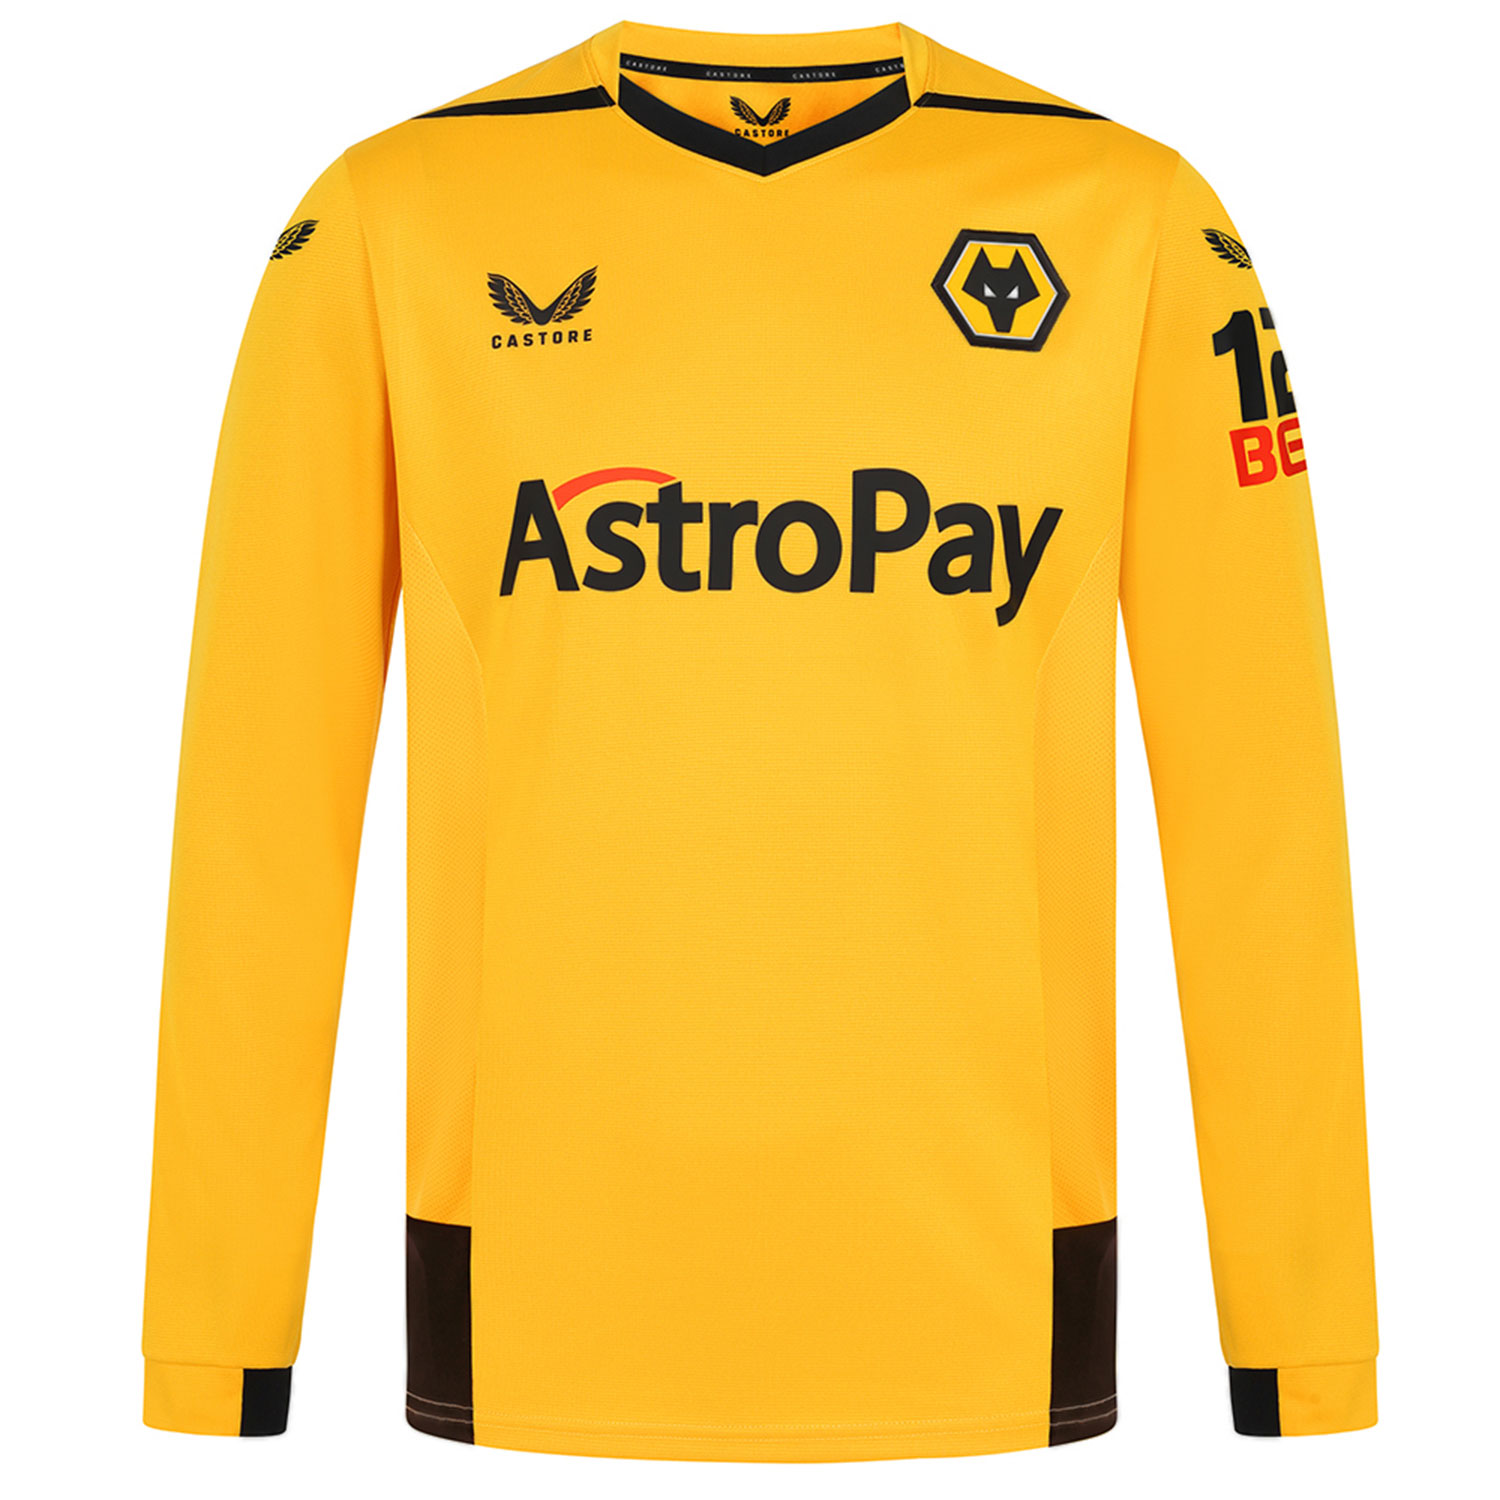 2022-23 Wolves Home Shirt - Long Sleeve - Adult
Be Part Of the Pack, with the 2022-23 Wolves Long Sleeved Home Shirt and show your pride on the street and in the stands.
Featuring detailed colour matching and dyeing to be true Wolves Gold and bring it back home to the club and fans.

Angular mesh inner sleeve and body panels for extra ventilation
Wolves back neck taping
Featuring our new club sponsor AstroPay on front of shirt
Long Sleeved
100% Polyester
